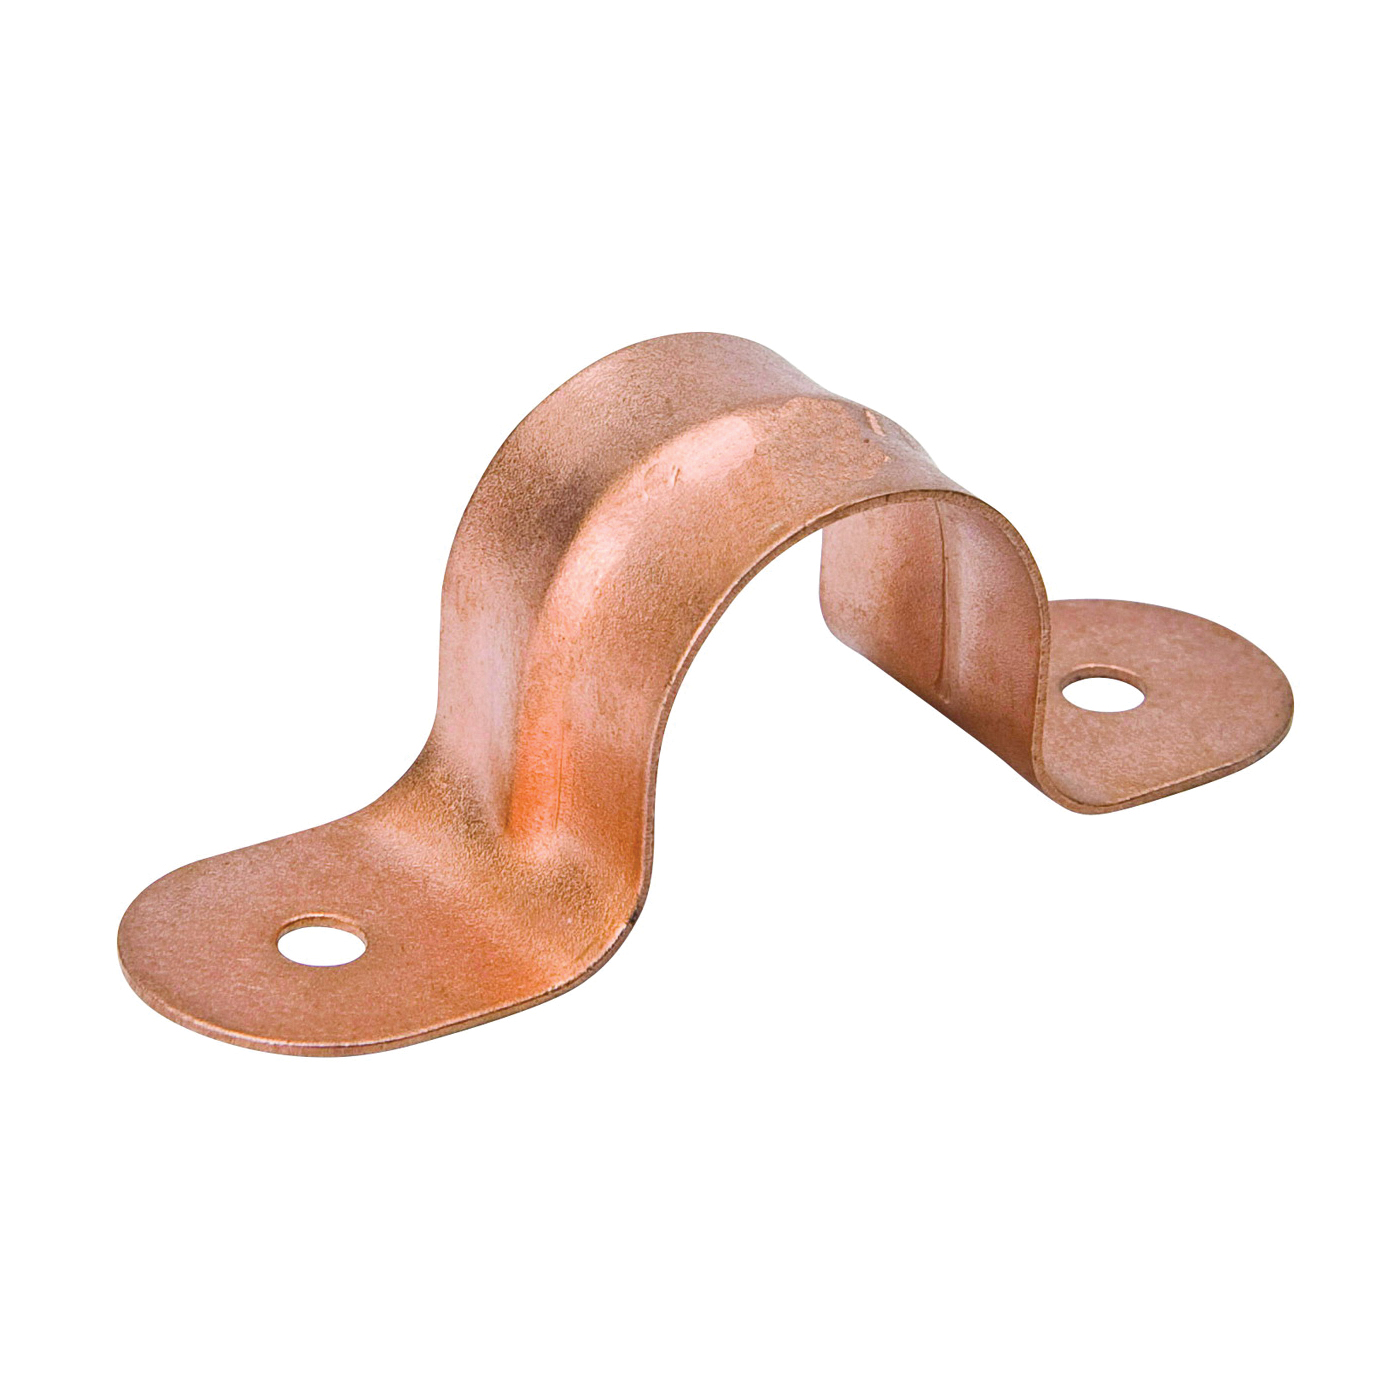 C13-125HC Pipe Strap, 1-1/4 in Opening, Steel